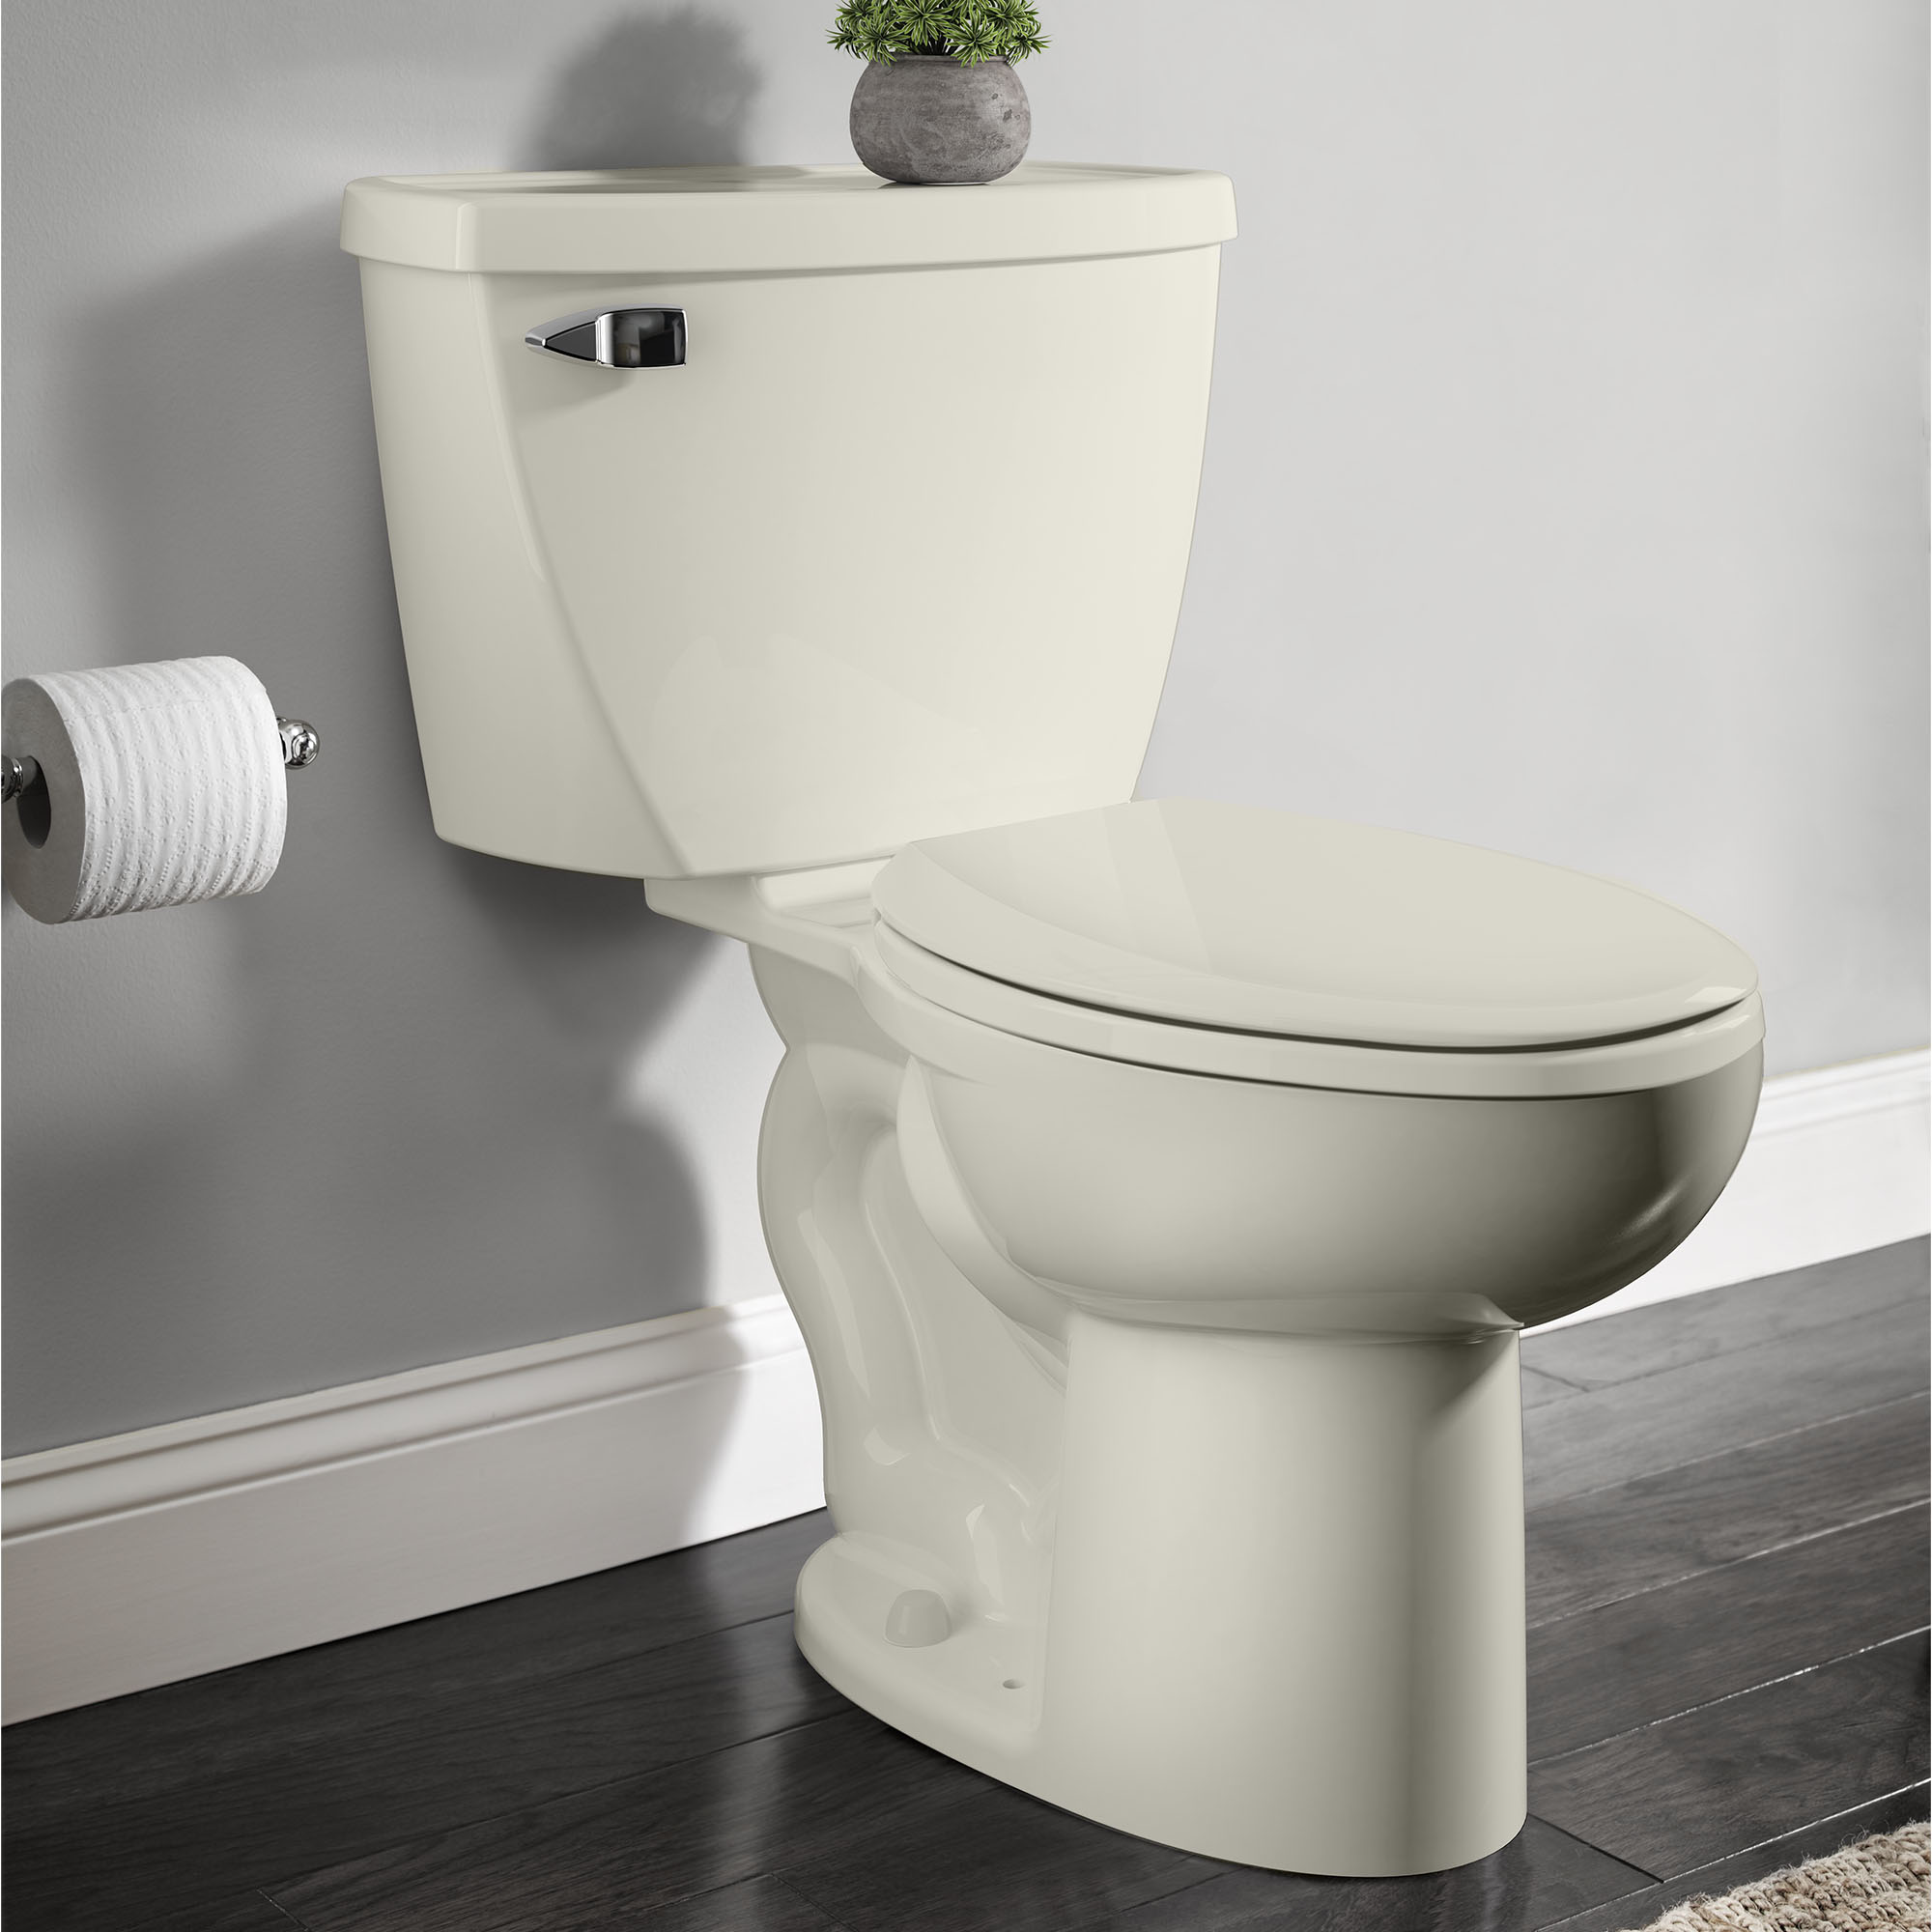 No more clogged toilets - Jet pressure flush system WOW 